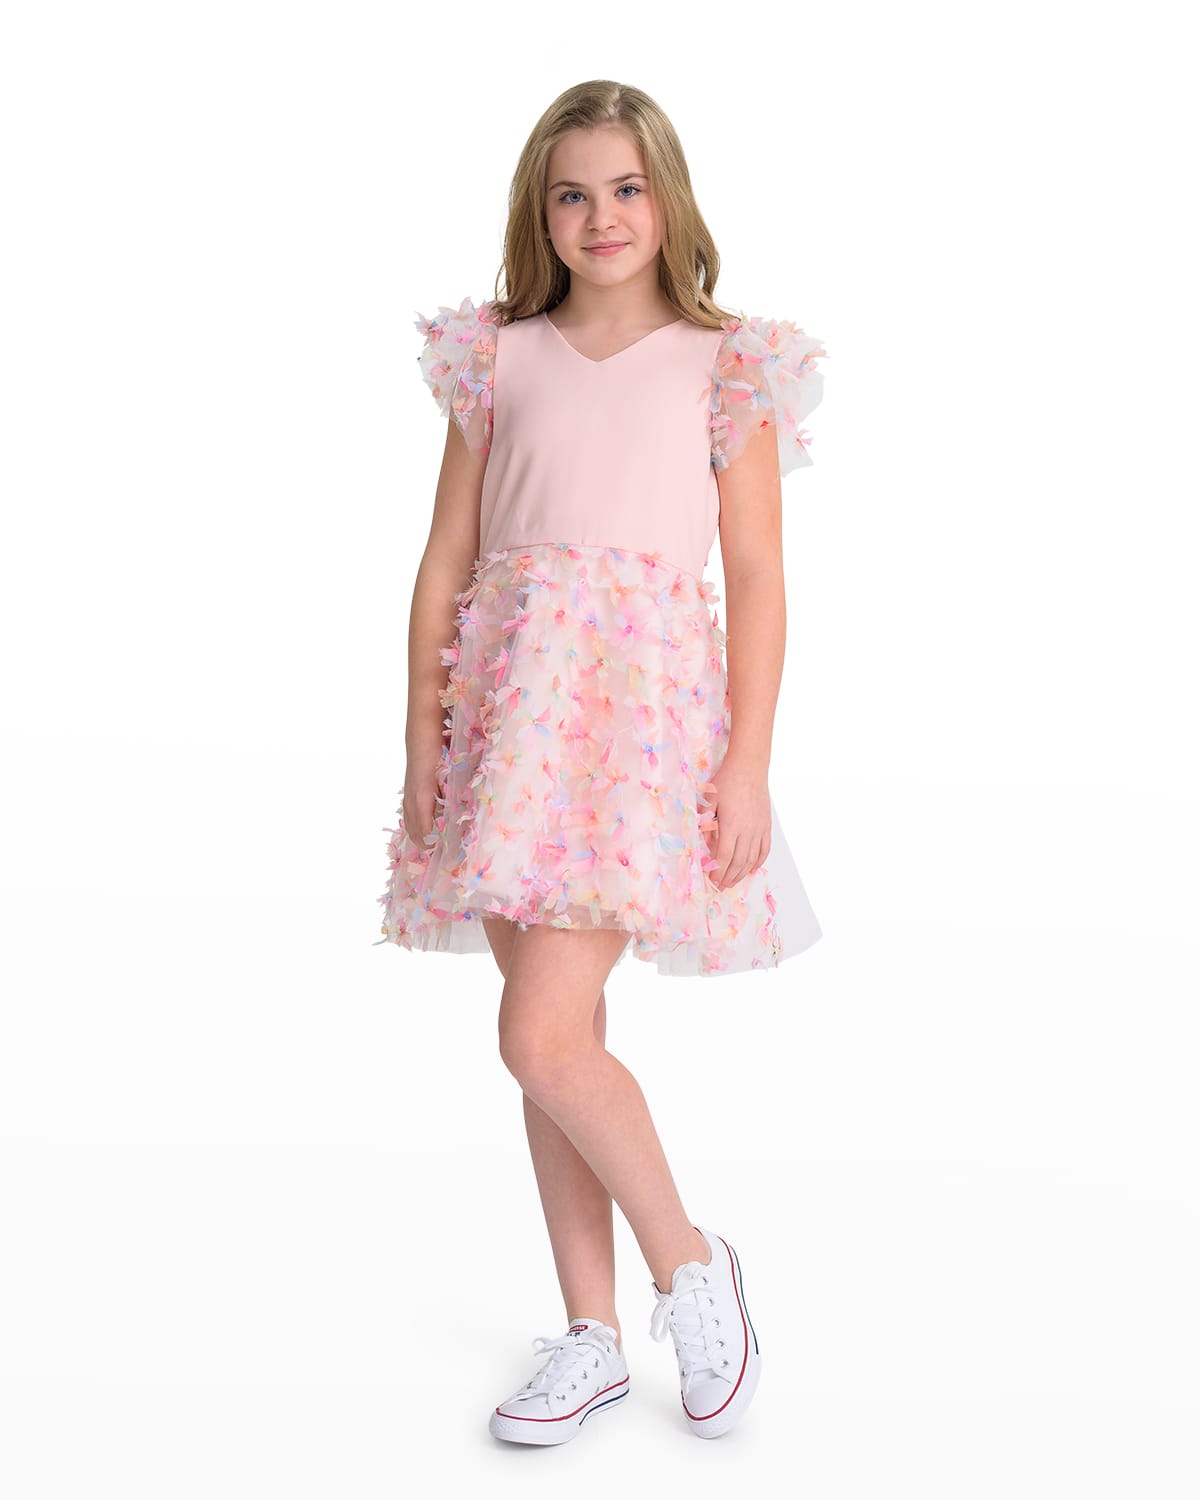 ZOE GIRL'S RACHEL KNIT BODICE DRESS WITH 3D BOWS AND PUFF SLEEVES